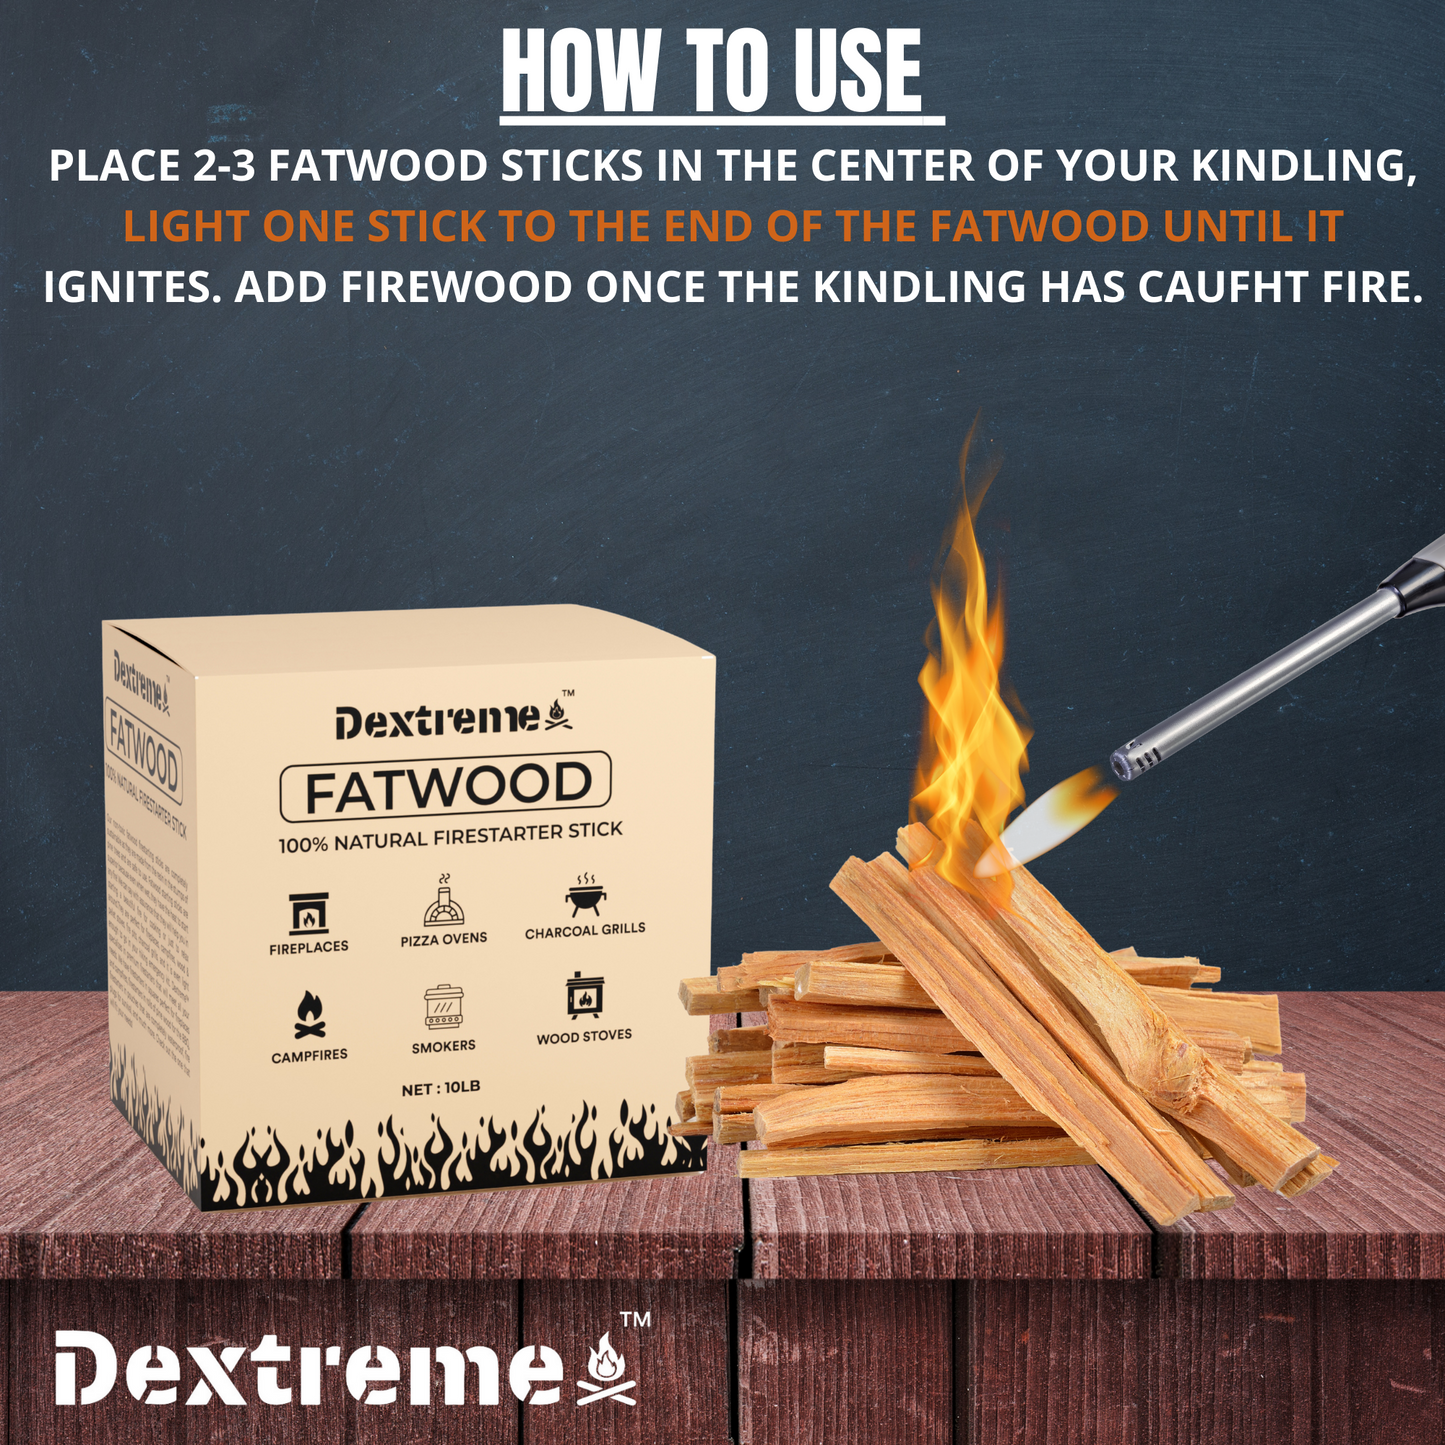 Dextreme Fatwood Fire Starter 10 lbs